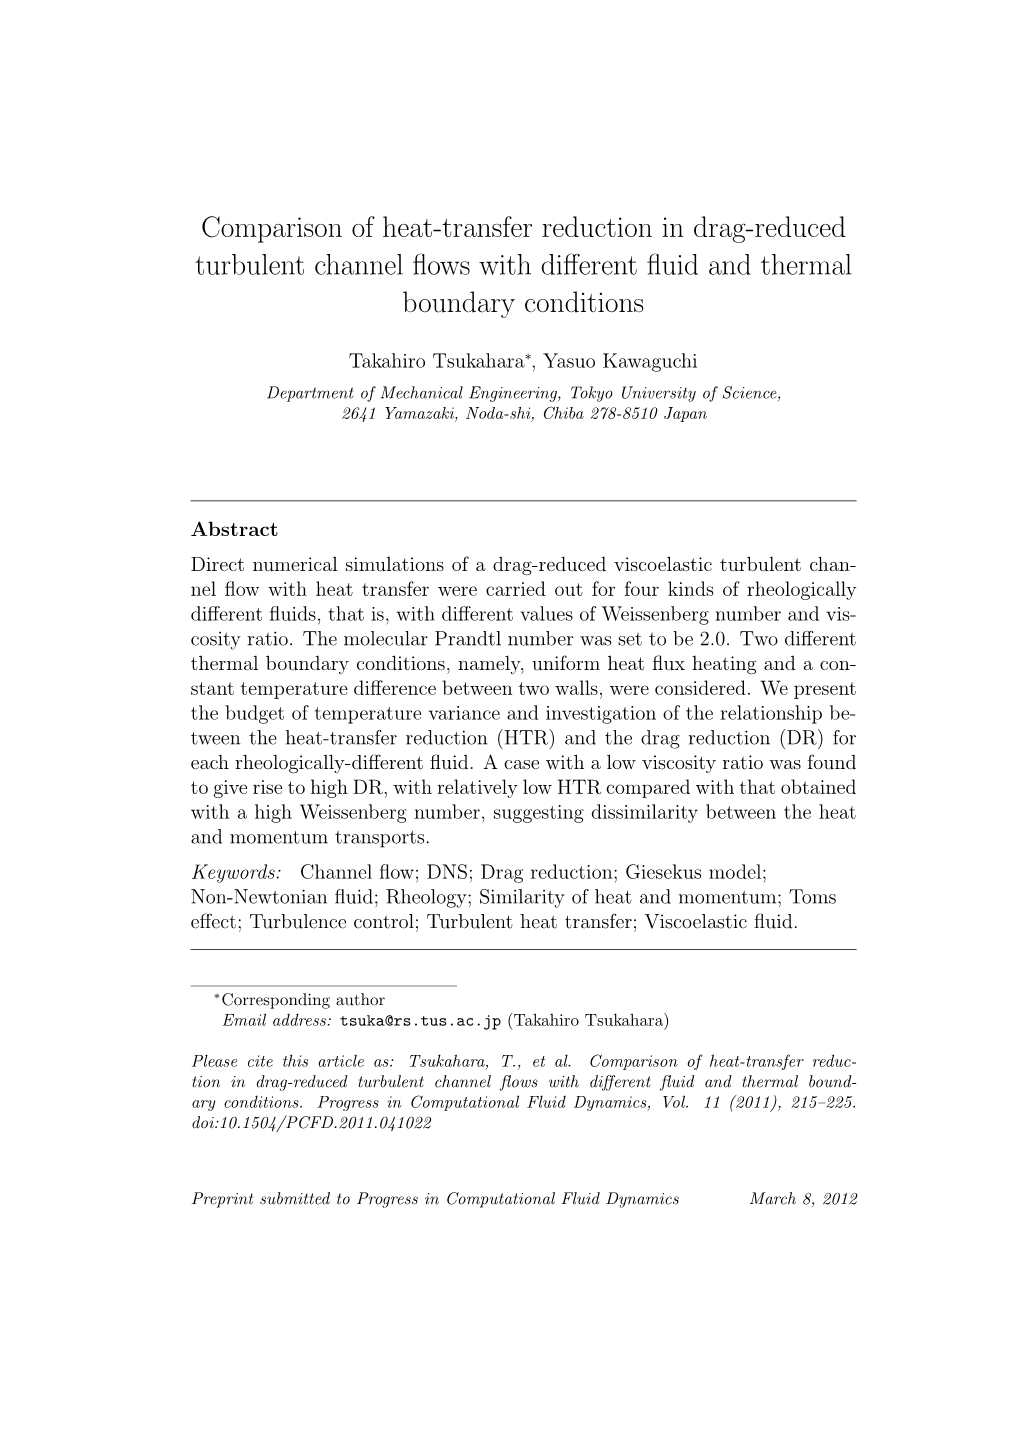 Comparison of Heat-Transfer Reduction in Drag-Reduced Turbulent Channel ﬂows with Diﬀerent ﬂuid and Thermal Boundary Conditions